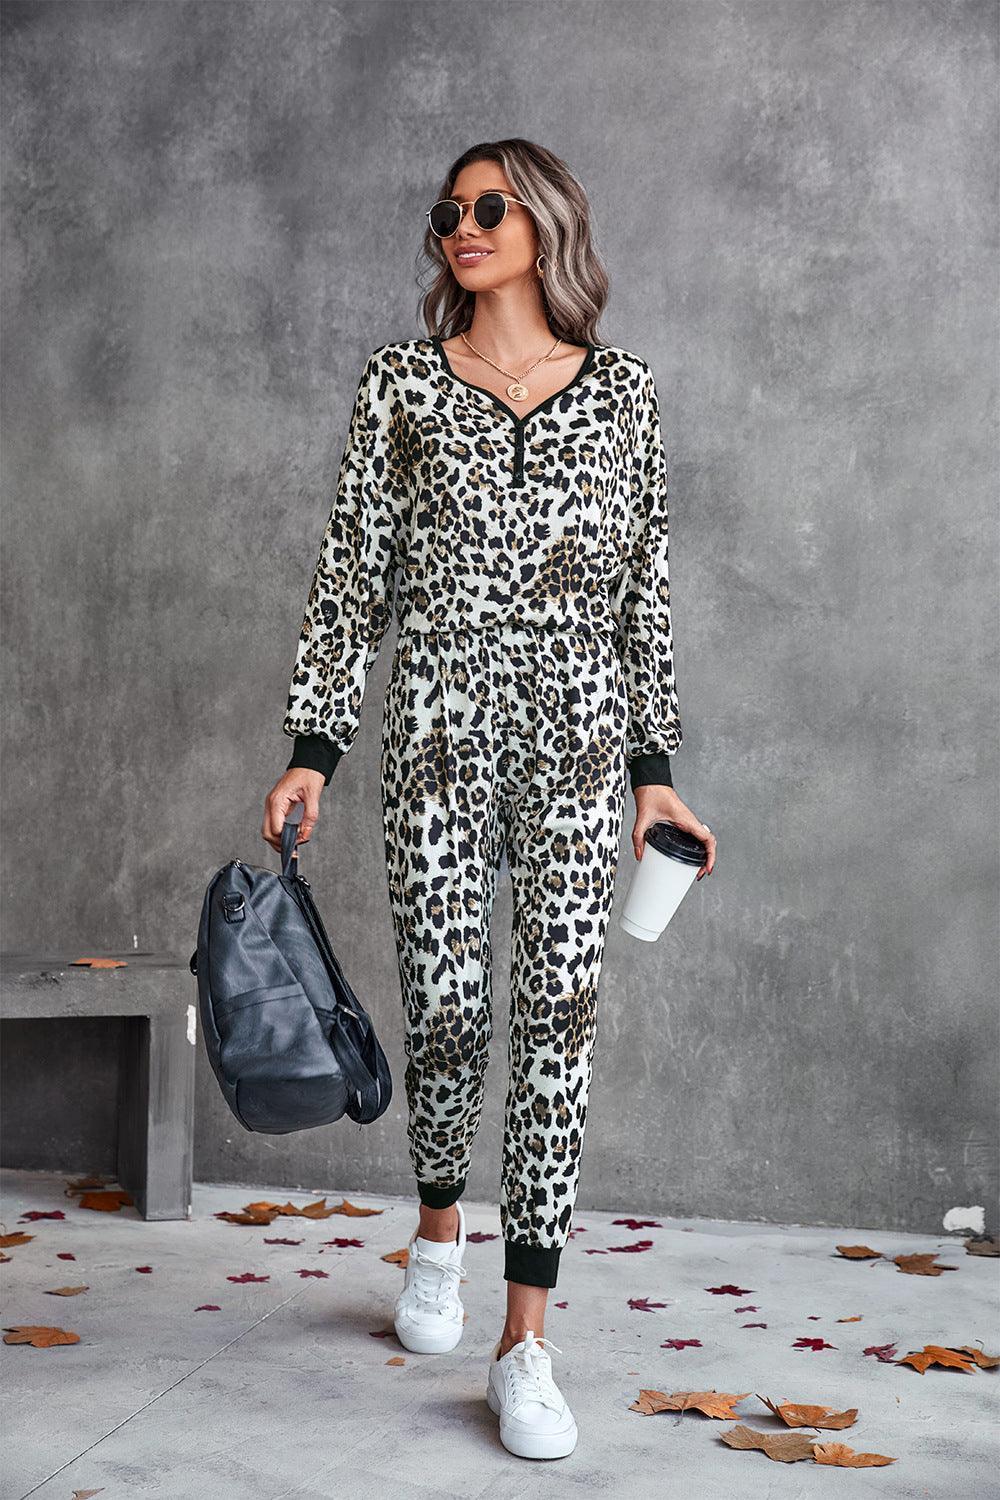 Leopard Buttoned Long Sleeves Top And Pants Set - MXSTUDIO.COM